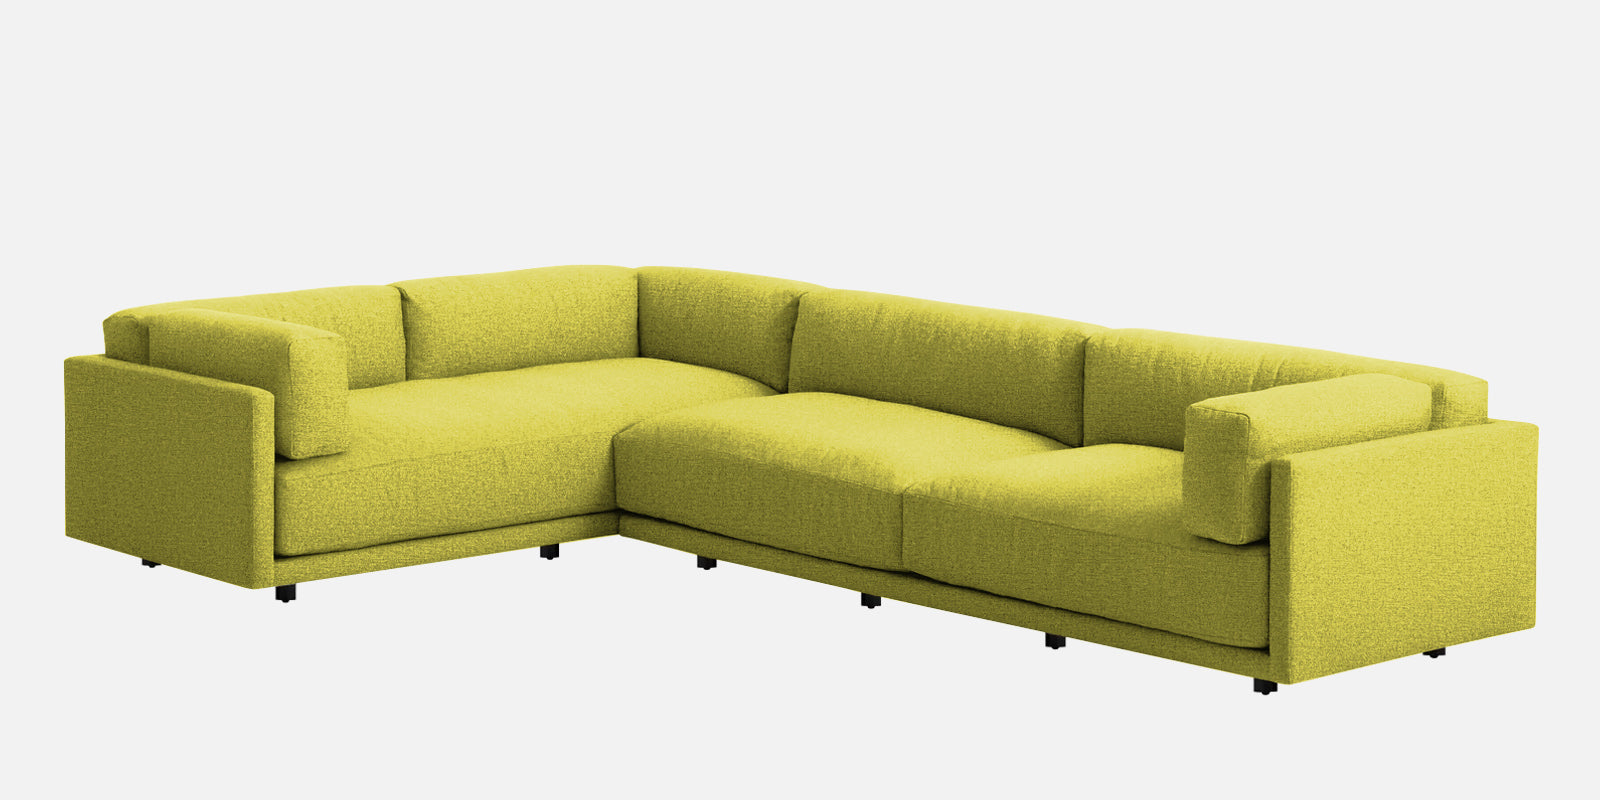 Nixon Fabric 6 Seater RHS Sectional Sofa In Parrot Green Colour